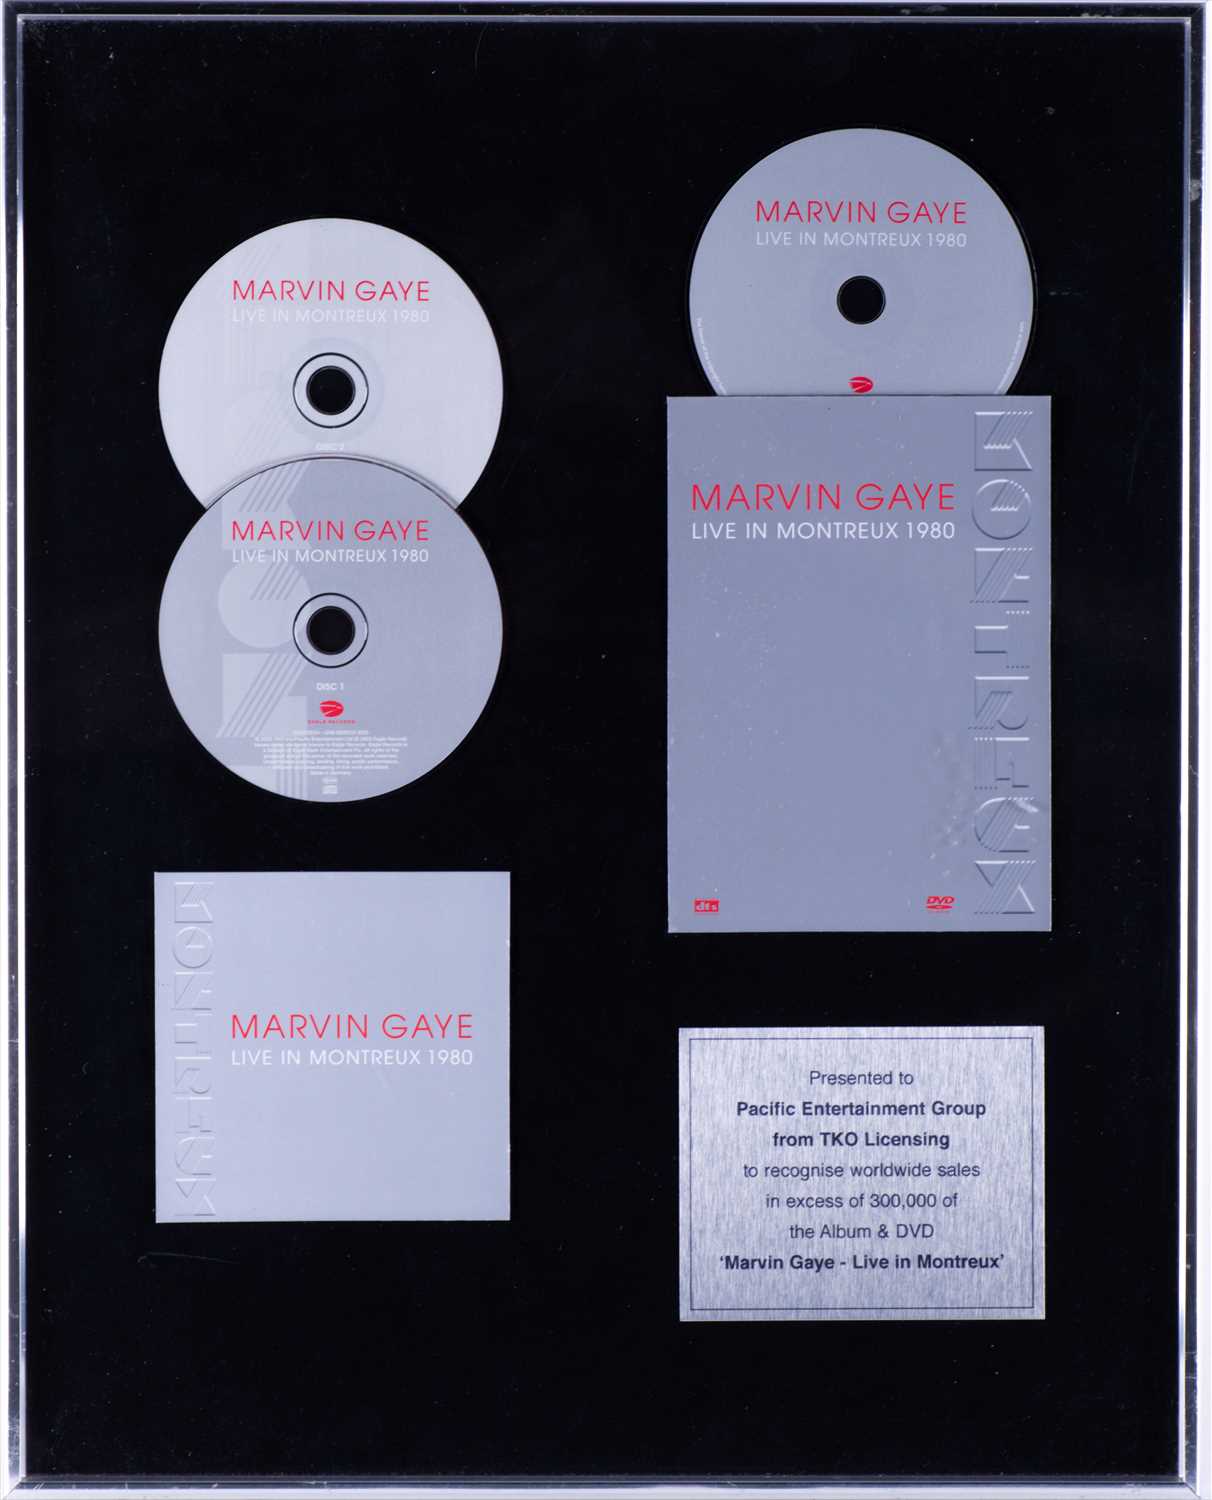 Marvin Gaye: a 'Live in Montreux 1980' framed presentation marking 'worldwide sale in excess of